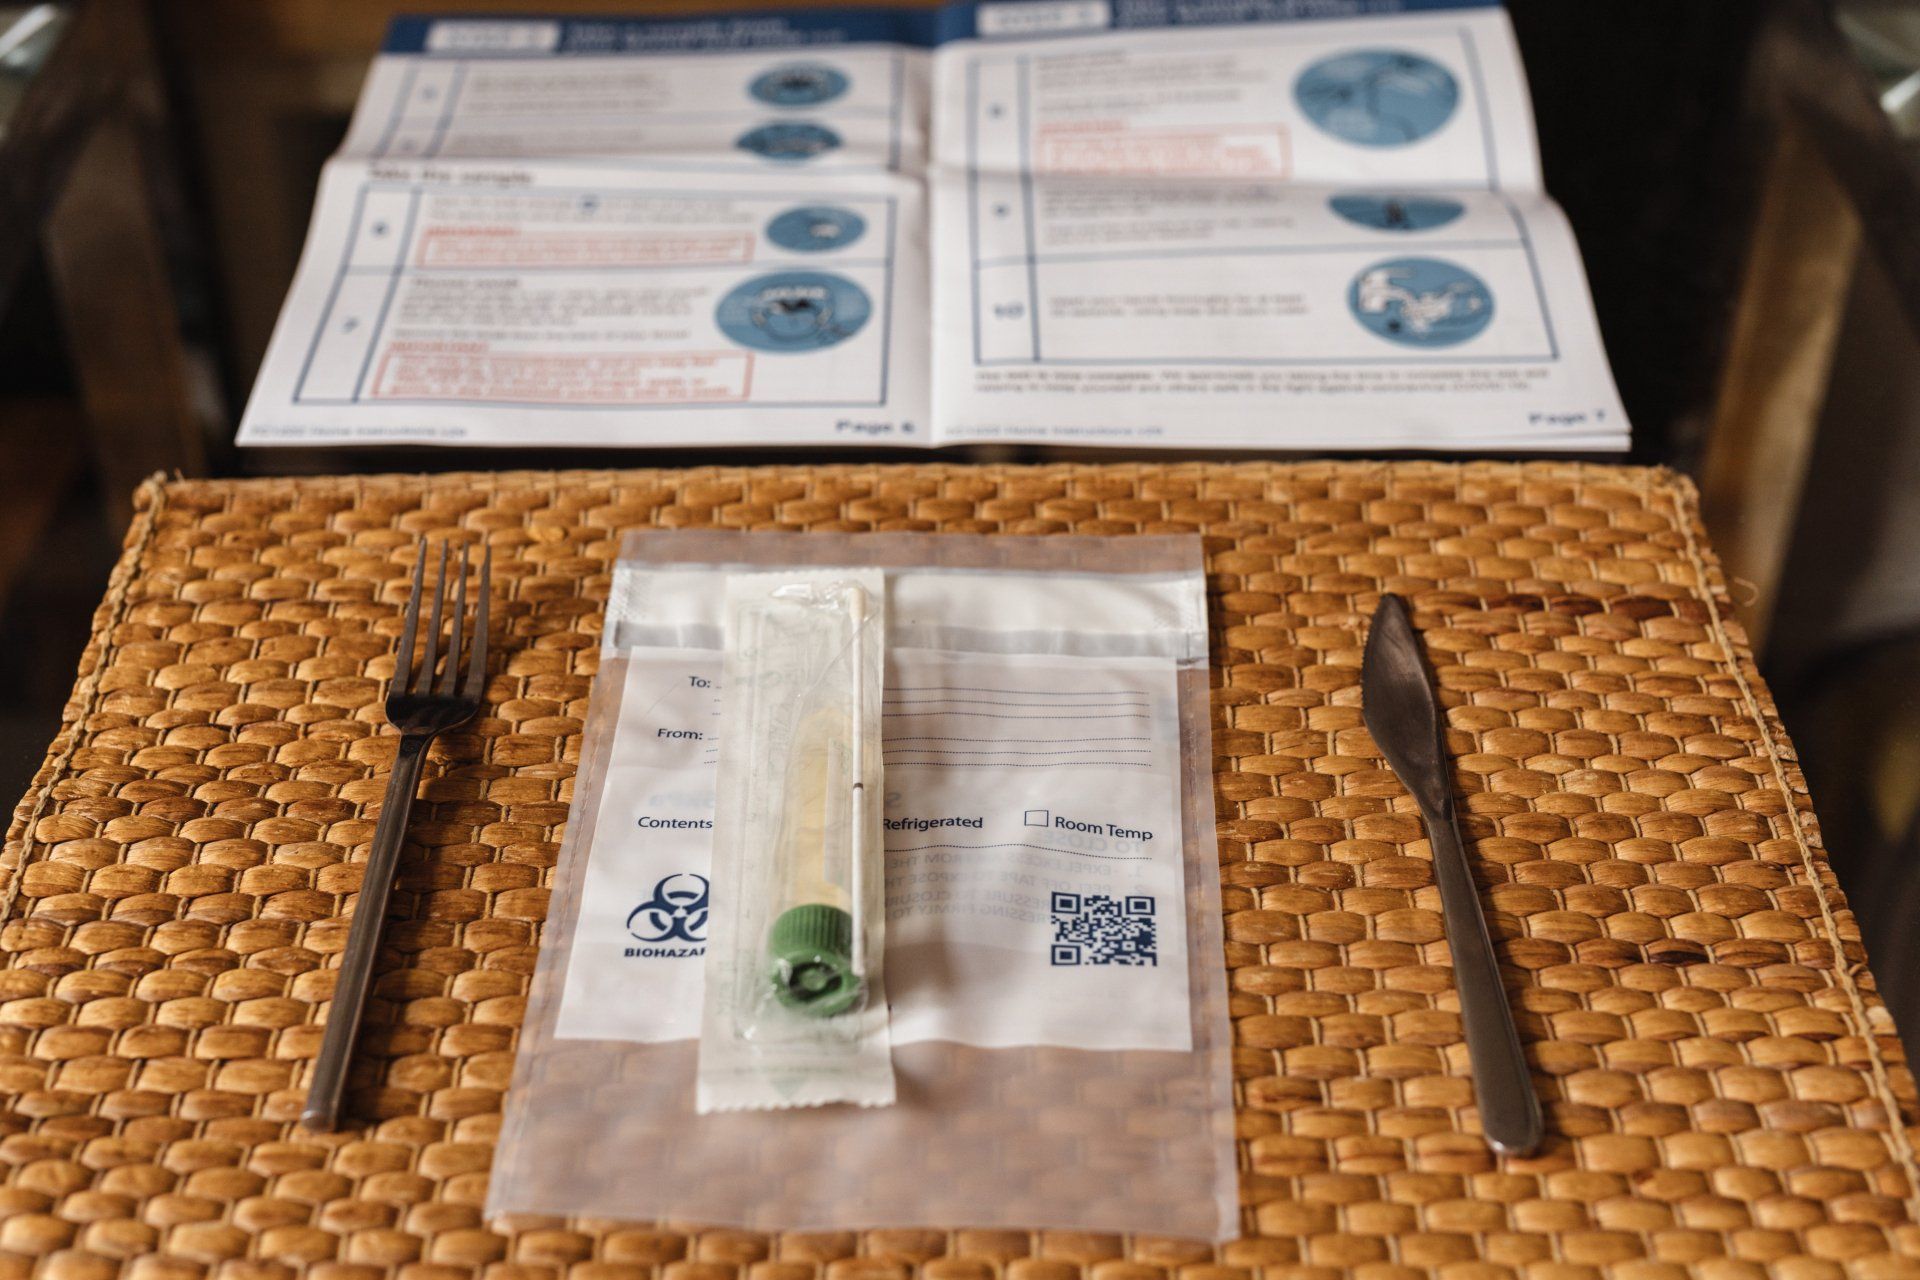 Covid Home Test Kit